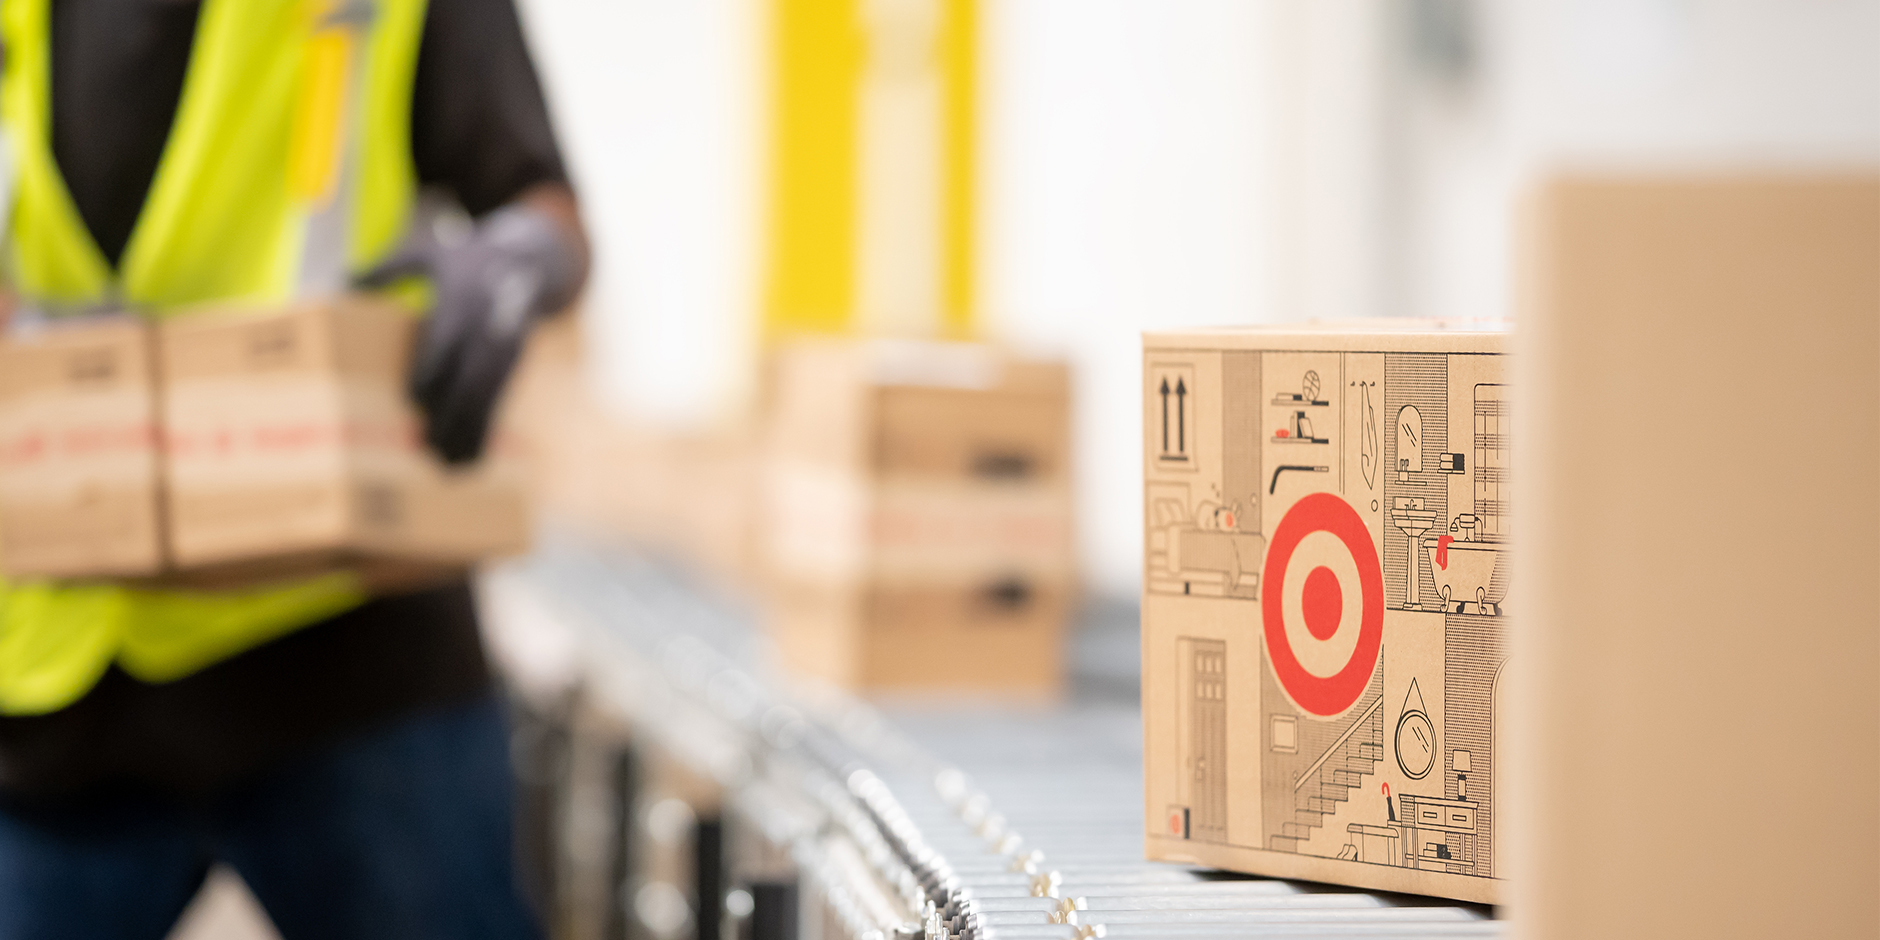 Target Expands E-Commerce Operations With New Delivery Hubs